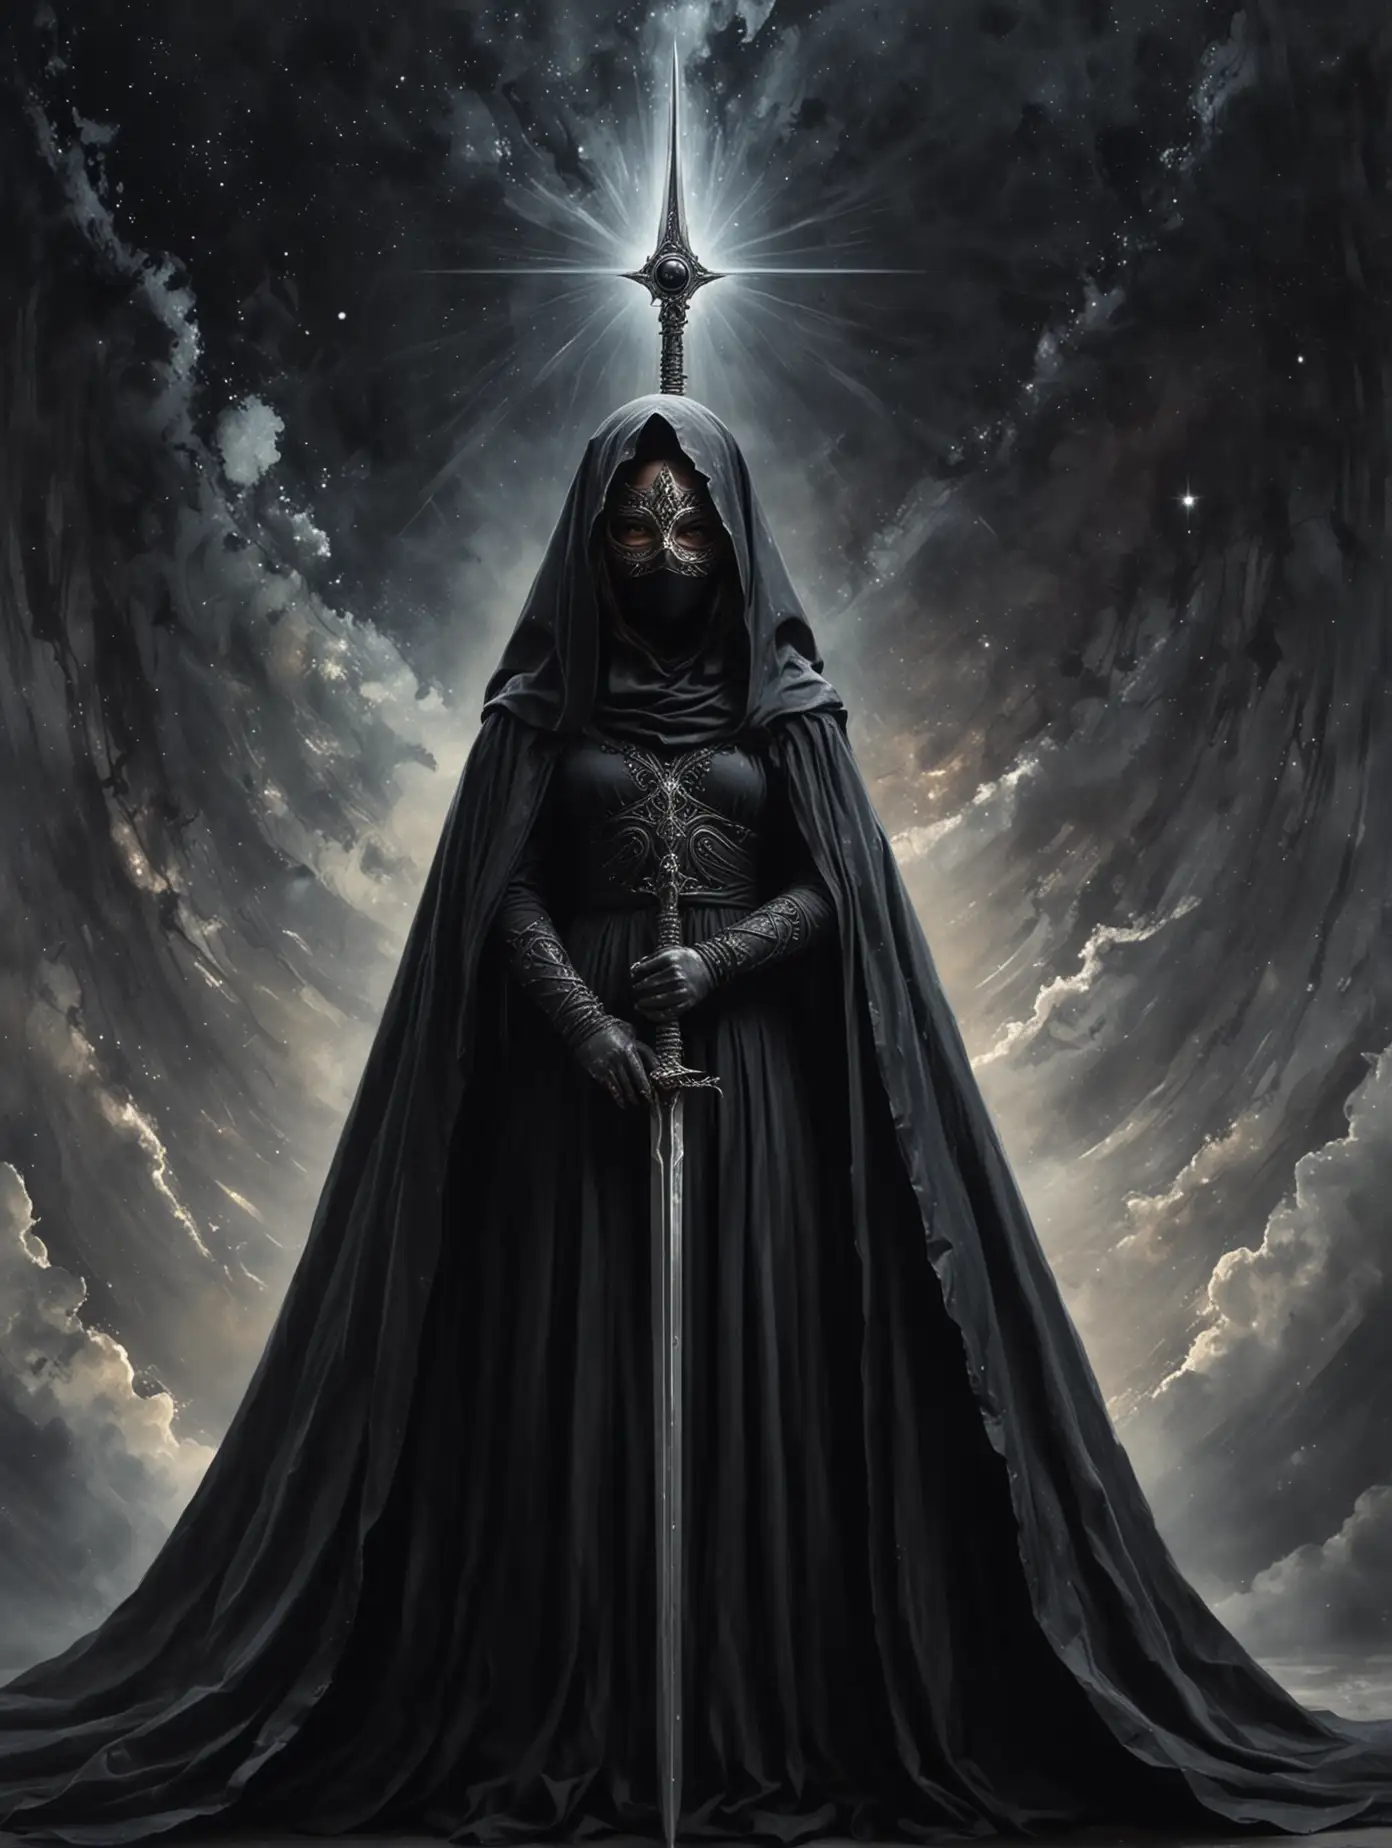 Sister-Geserit-Confronts-the-Abyss-Enigmatic-Figure-with-Cosmic-Sword